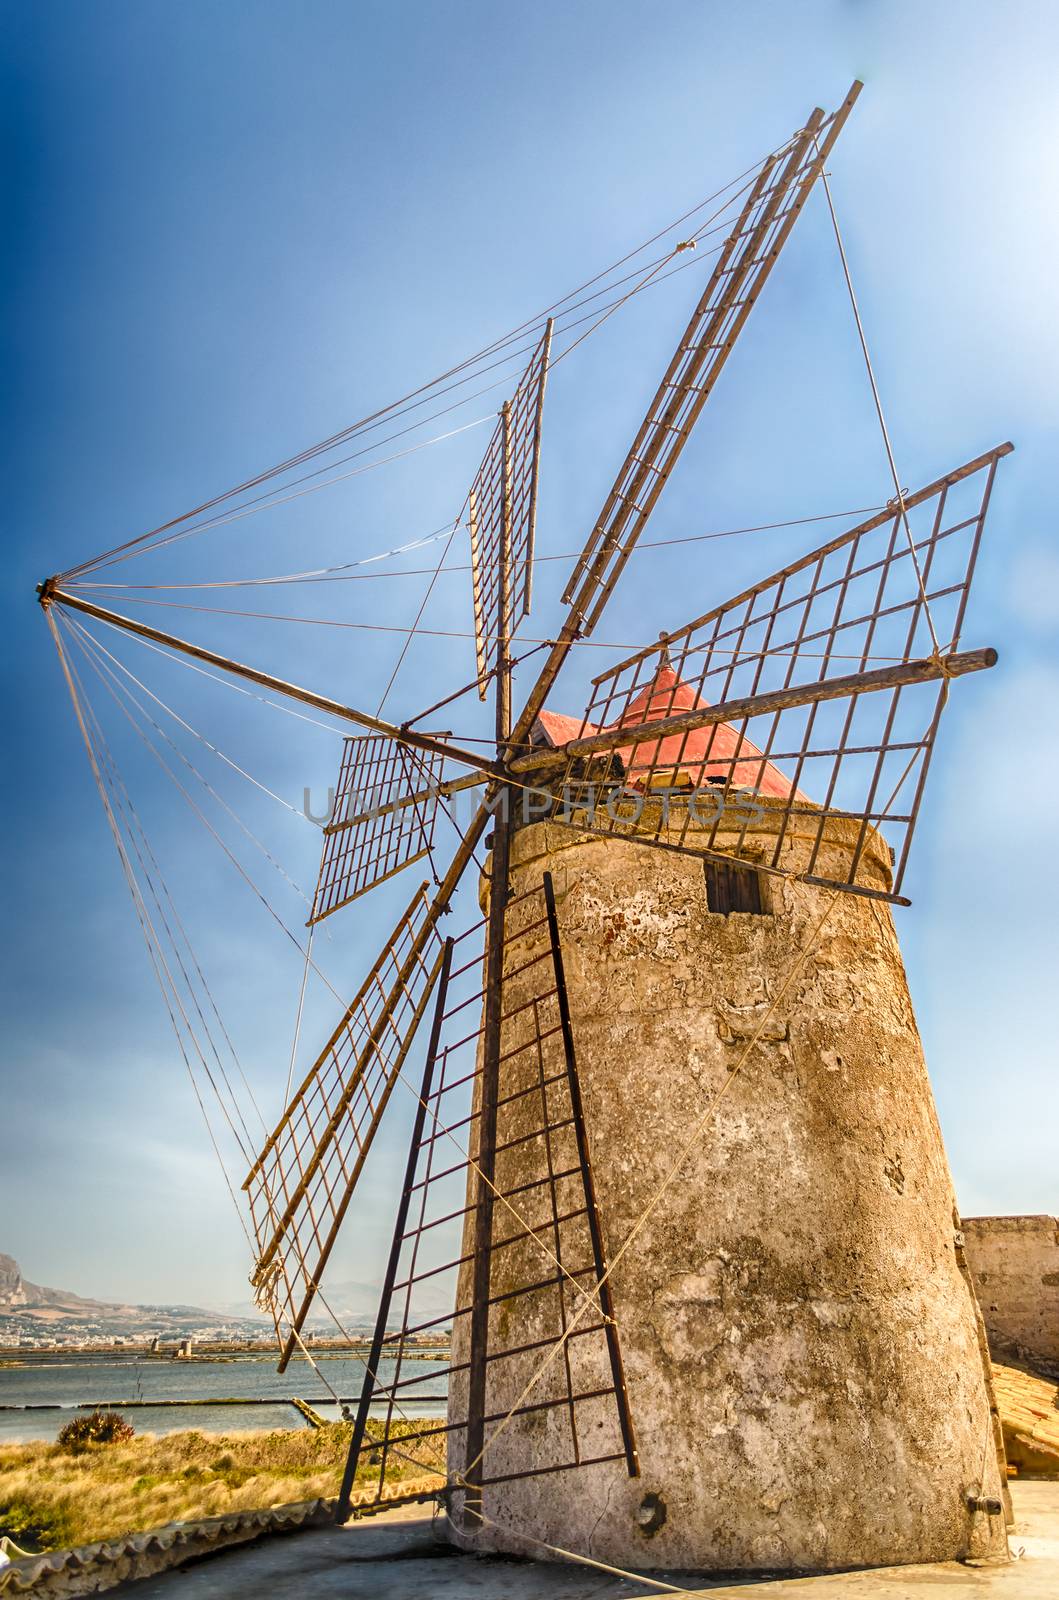 Old Windmill for Salt Production, Sicily by marcorubino